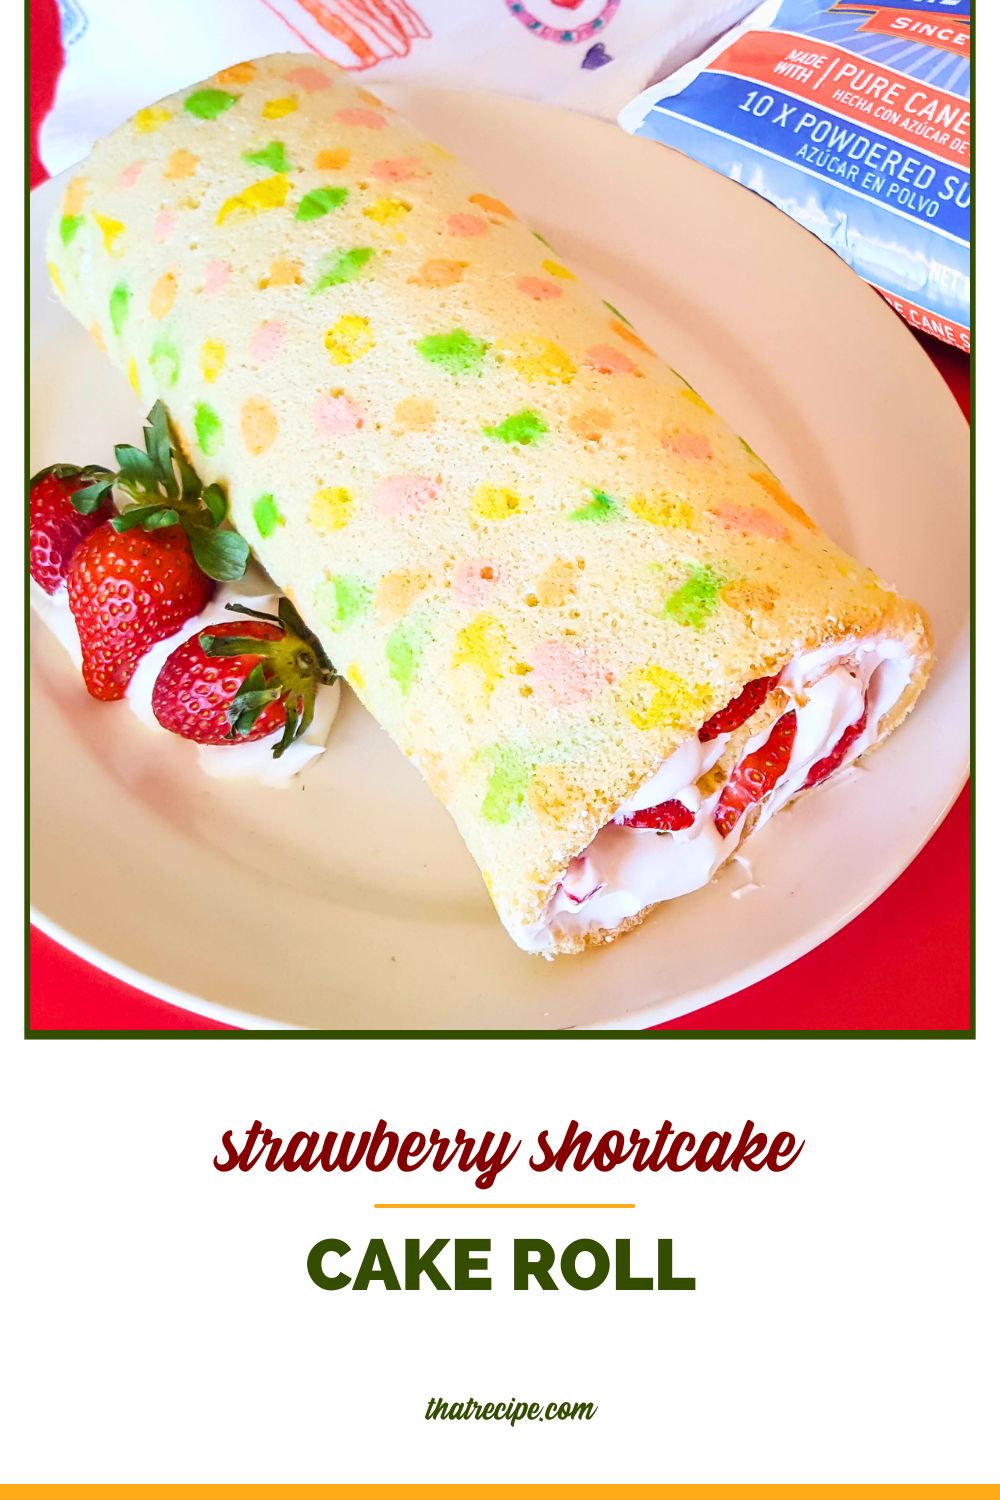 vanilla swiss cake roll with strawberries and whipped cream with text overlay "strawberry shortcake cake roll"